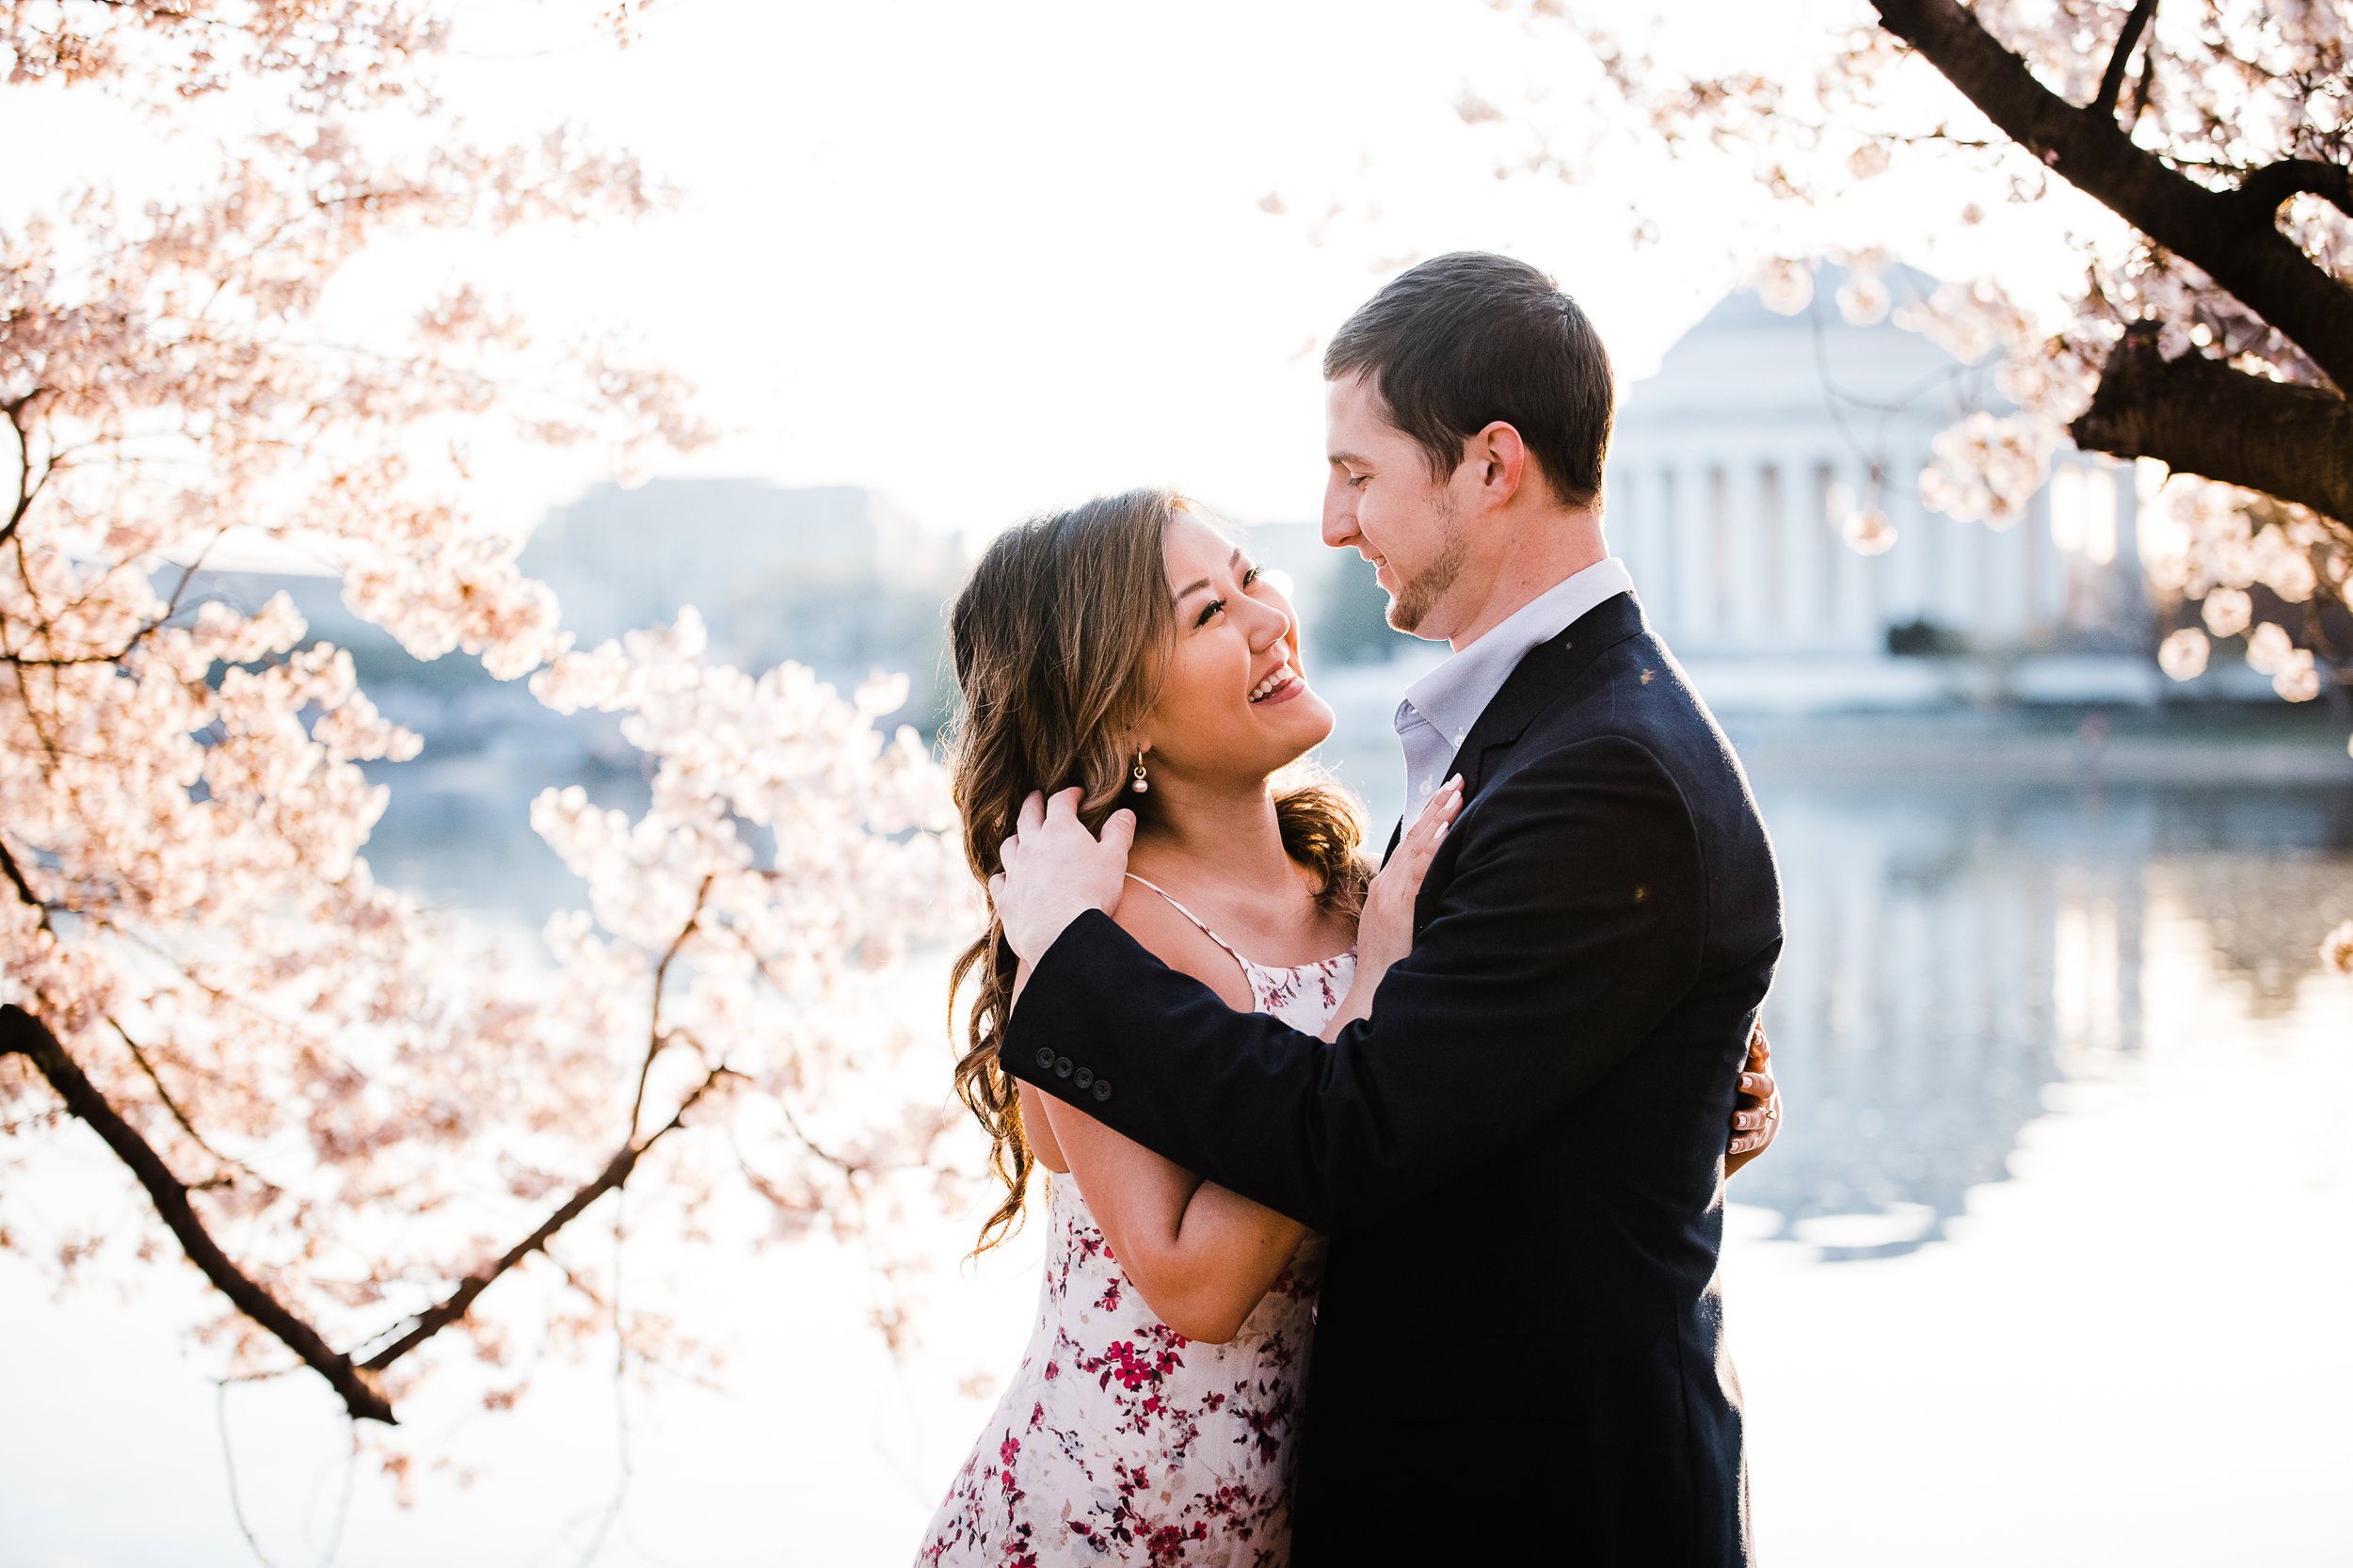 Engagement Session at The Tidal Basin Cherry Blossom Season